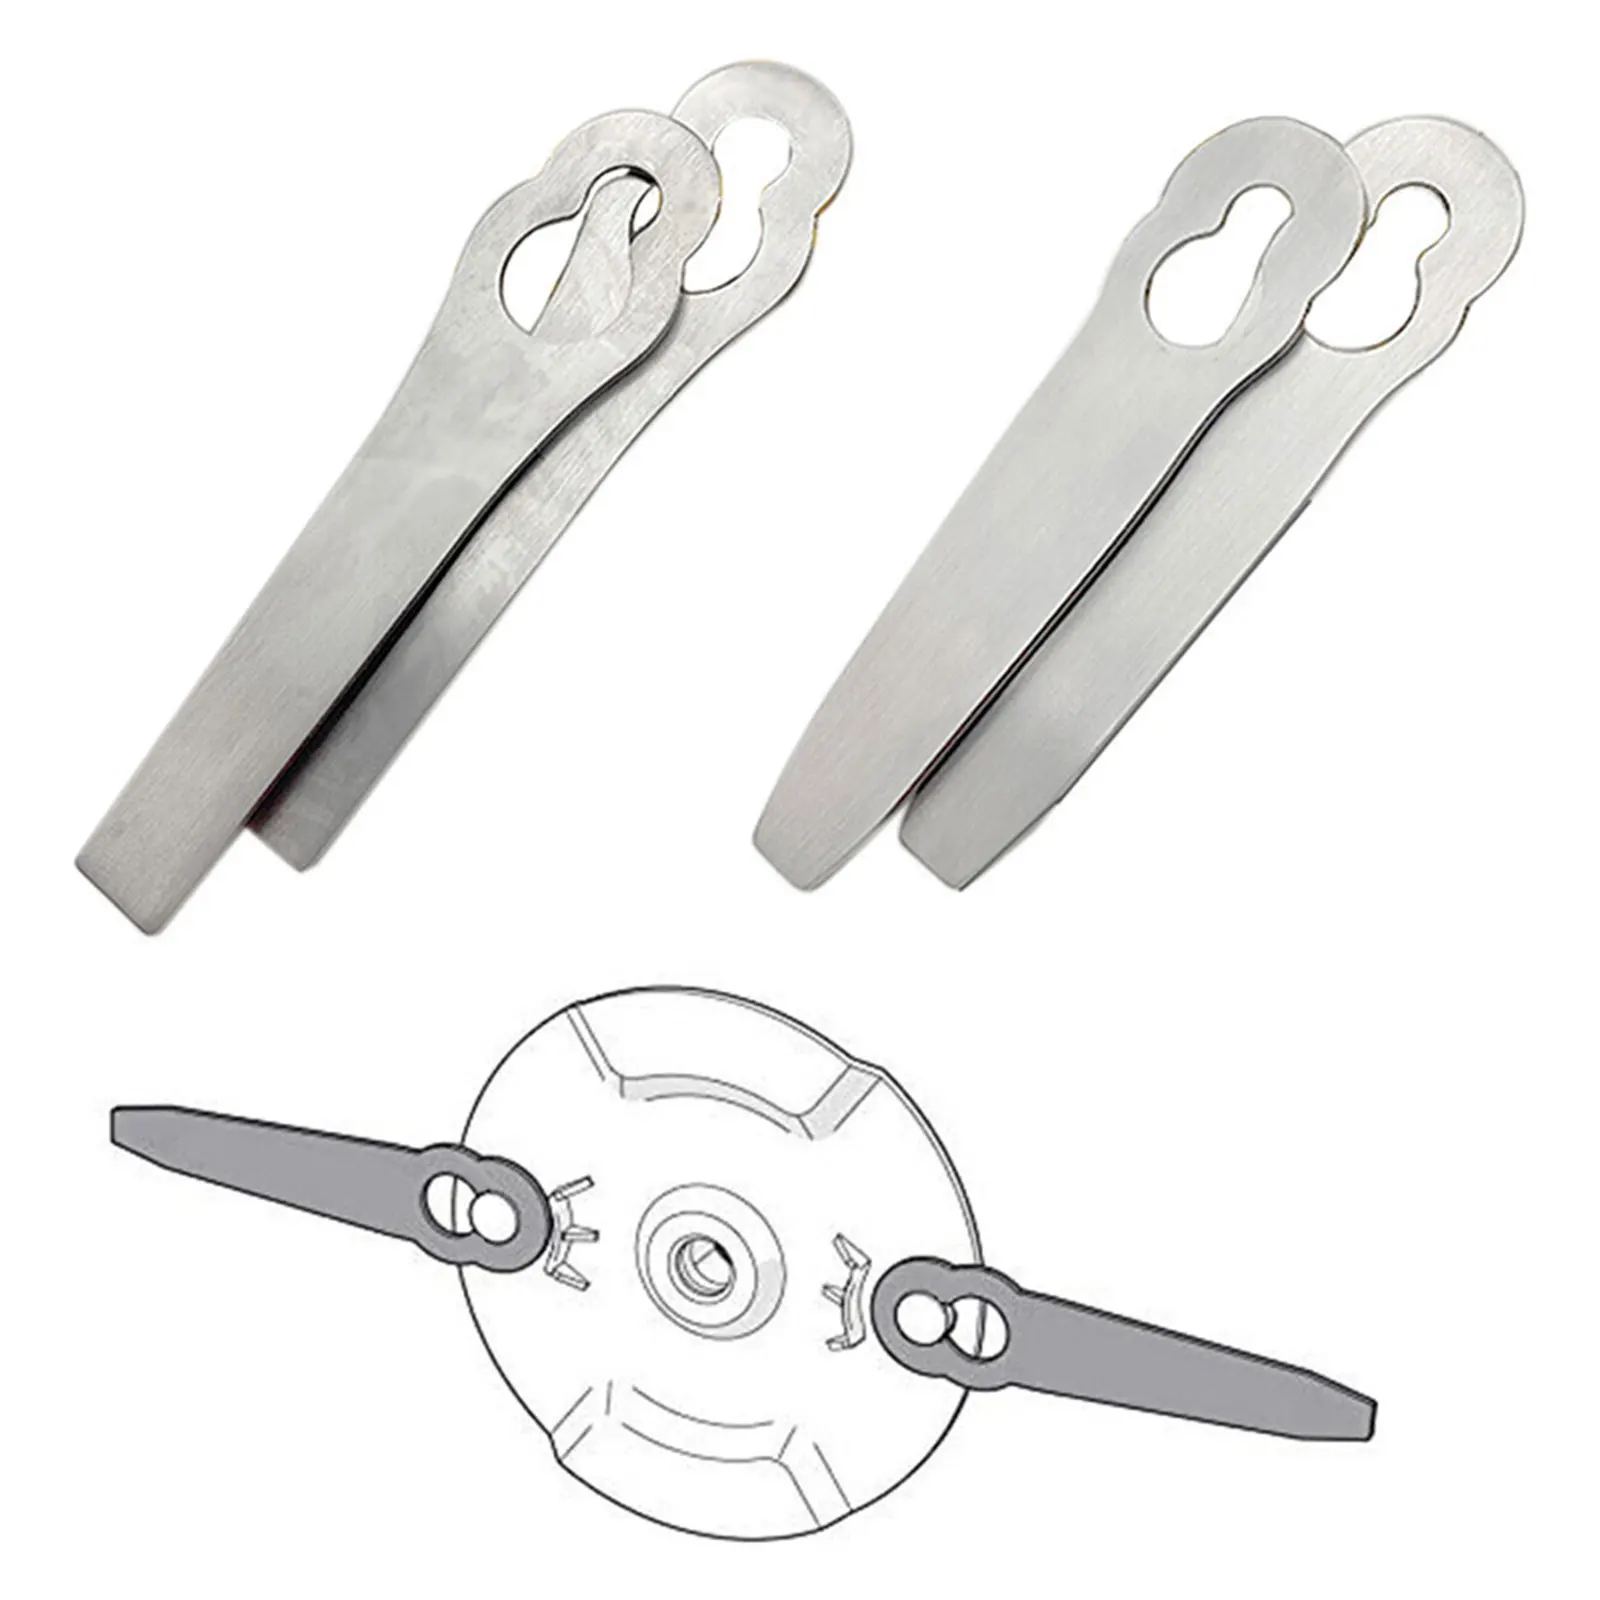 1/3Pcs Stainless Steel Replacement Blades Spare Knives For STIHL FSA 45 FSA 57 Grass Trimmer Lawn Mower Accessories Garden Tool